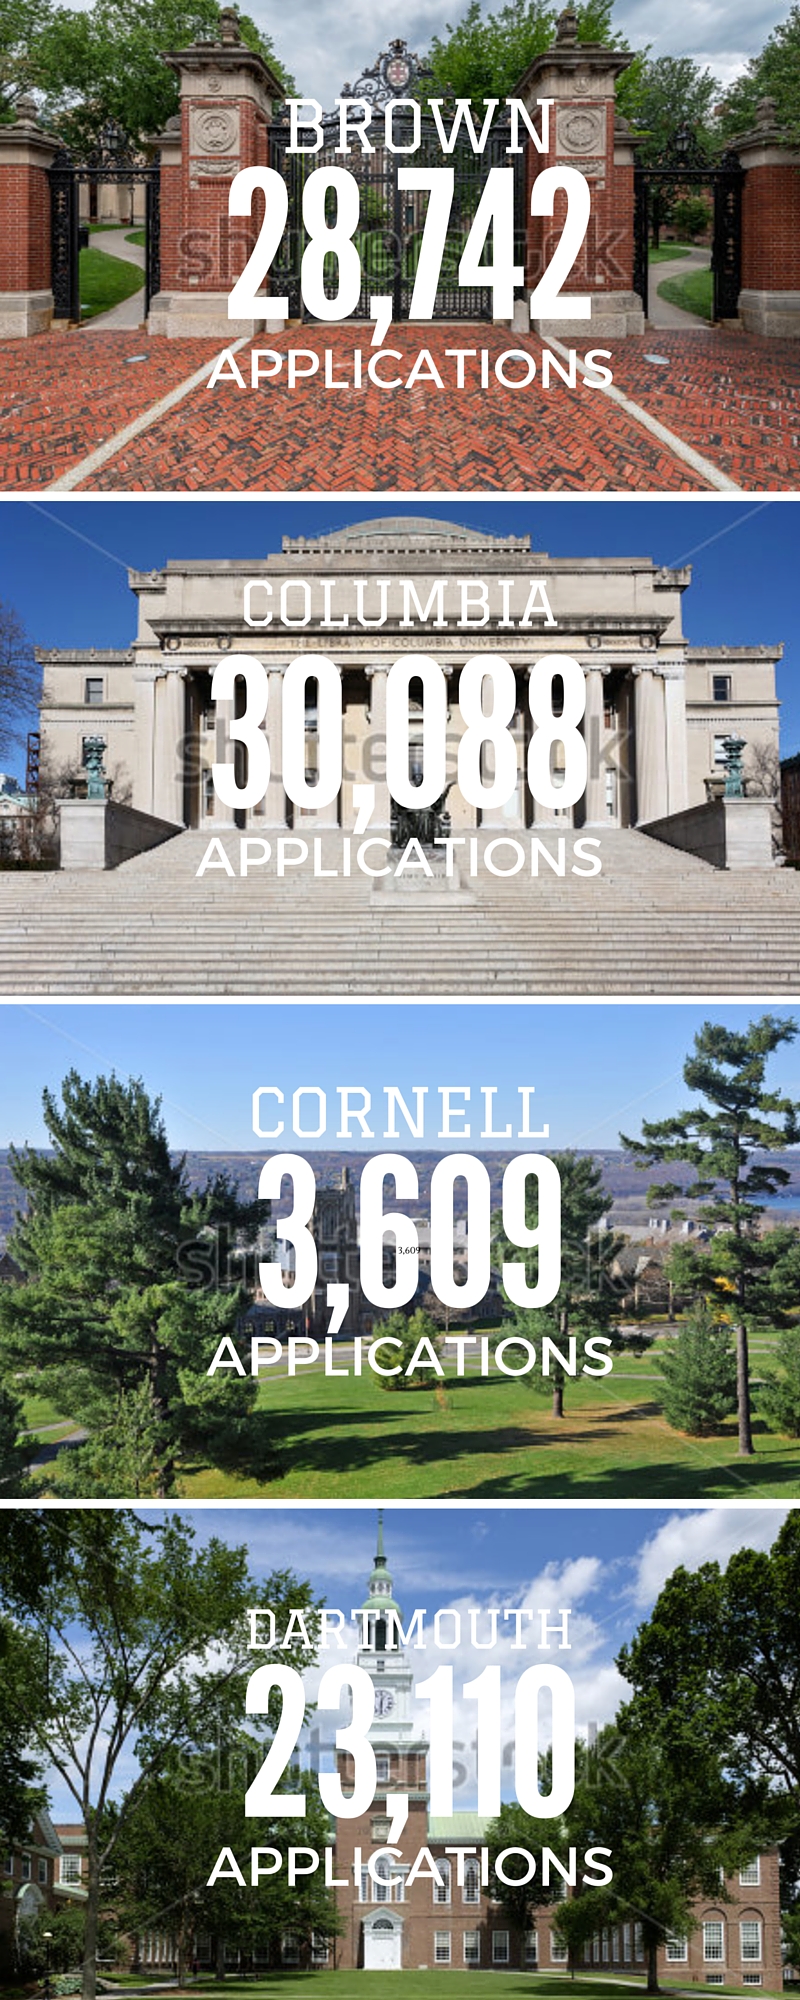 Application rates of the Ivy Leagues in 2015.